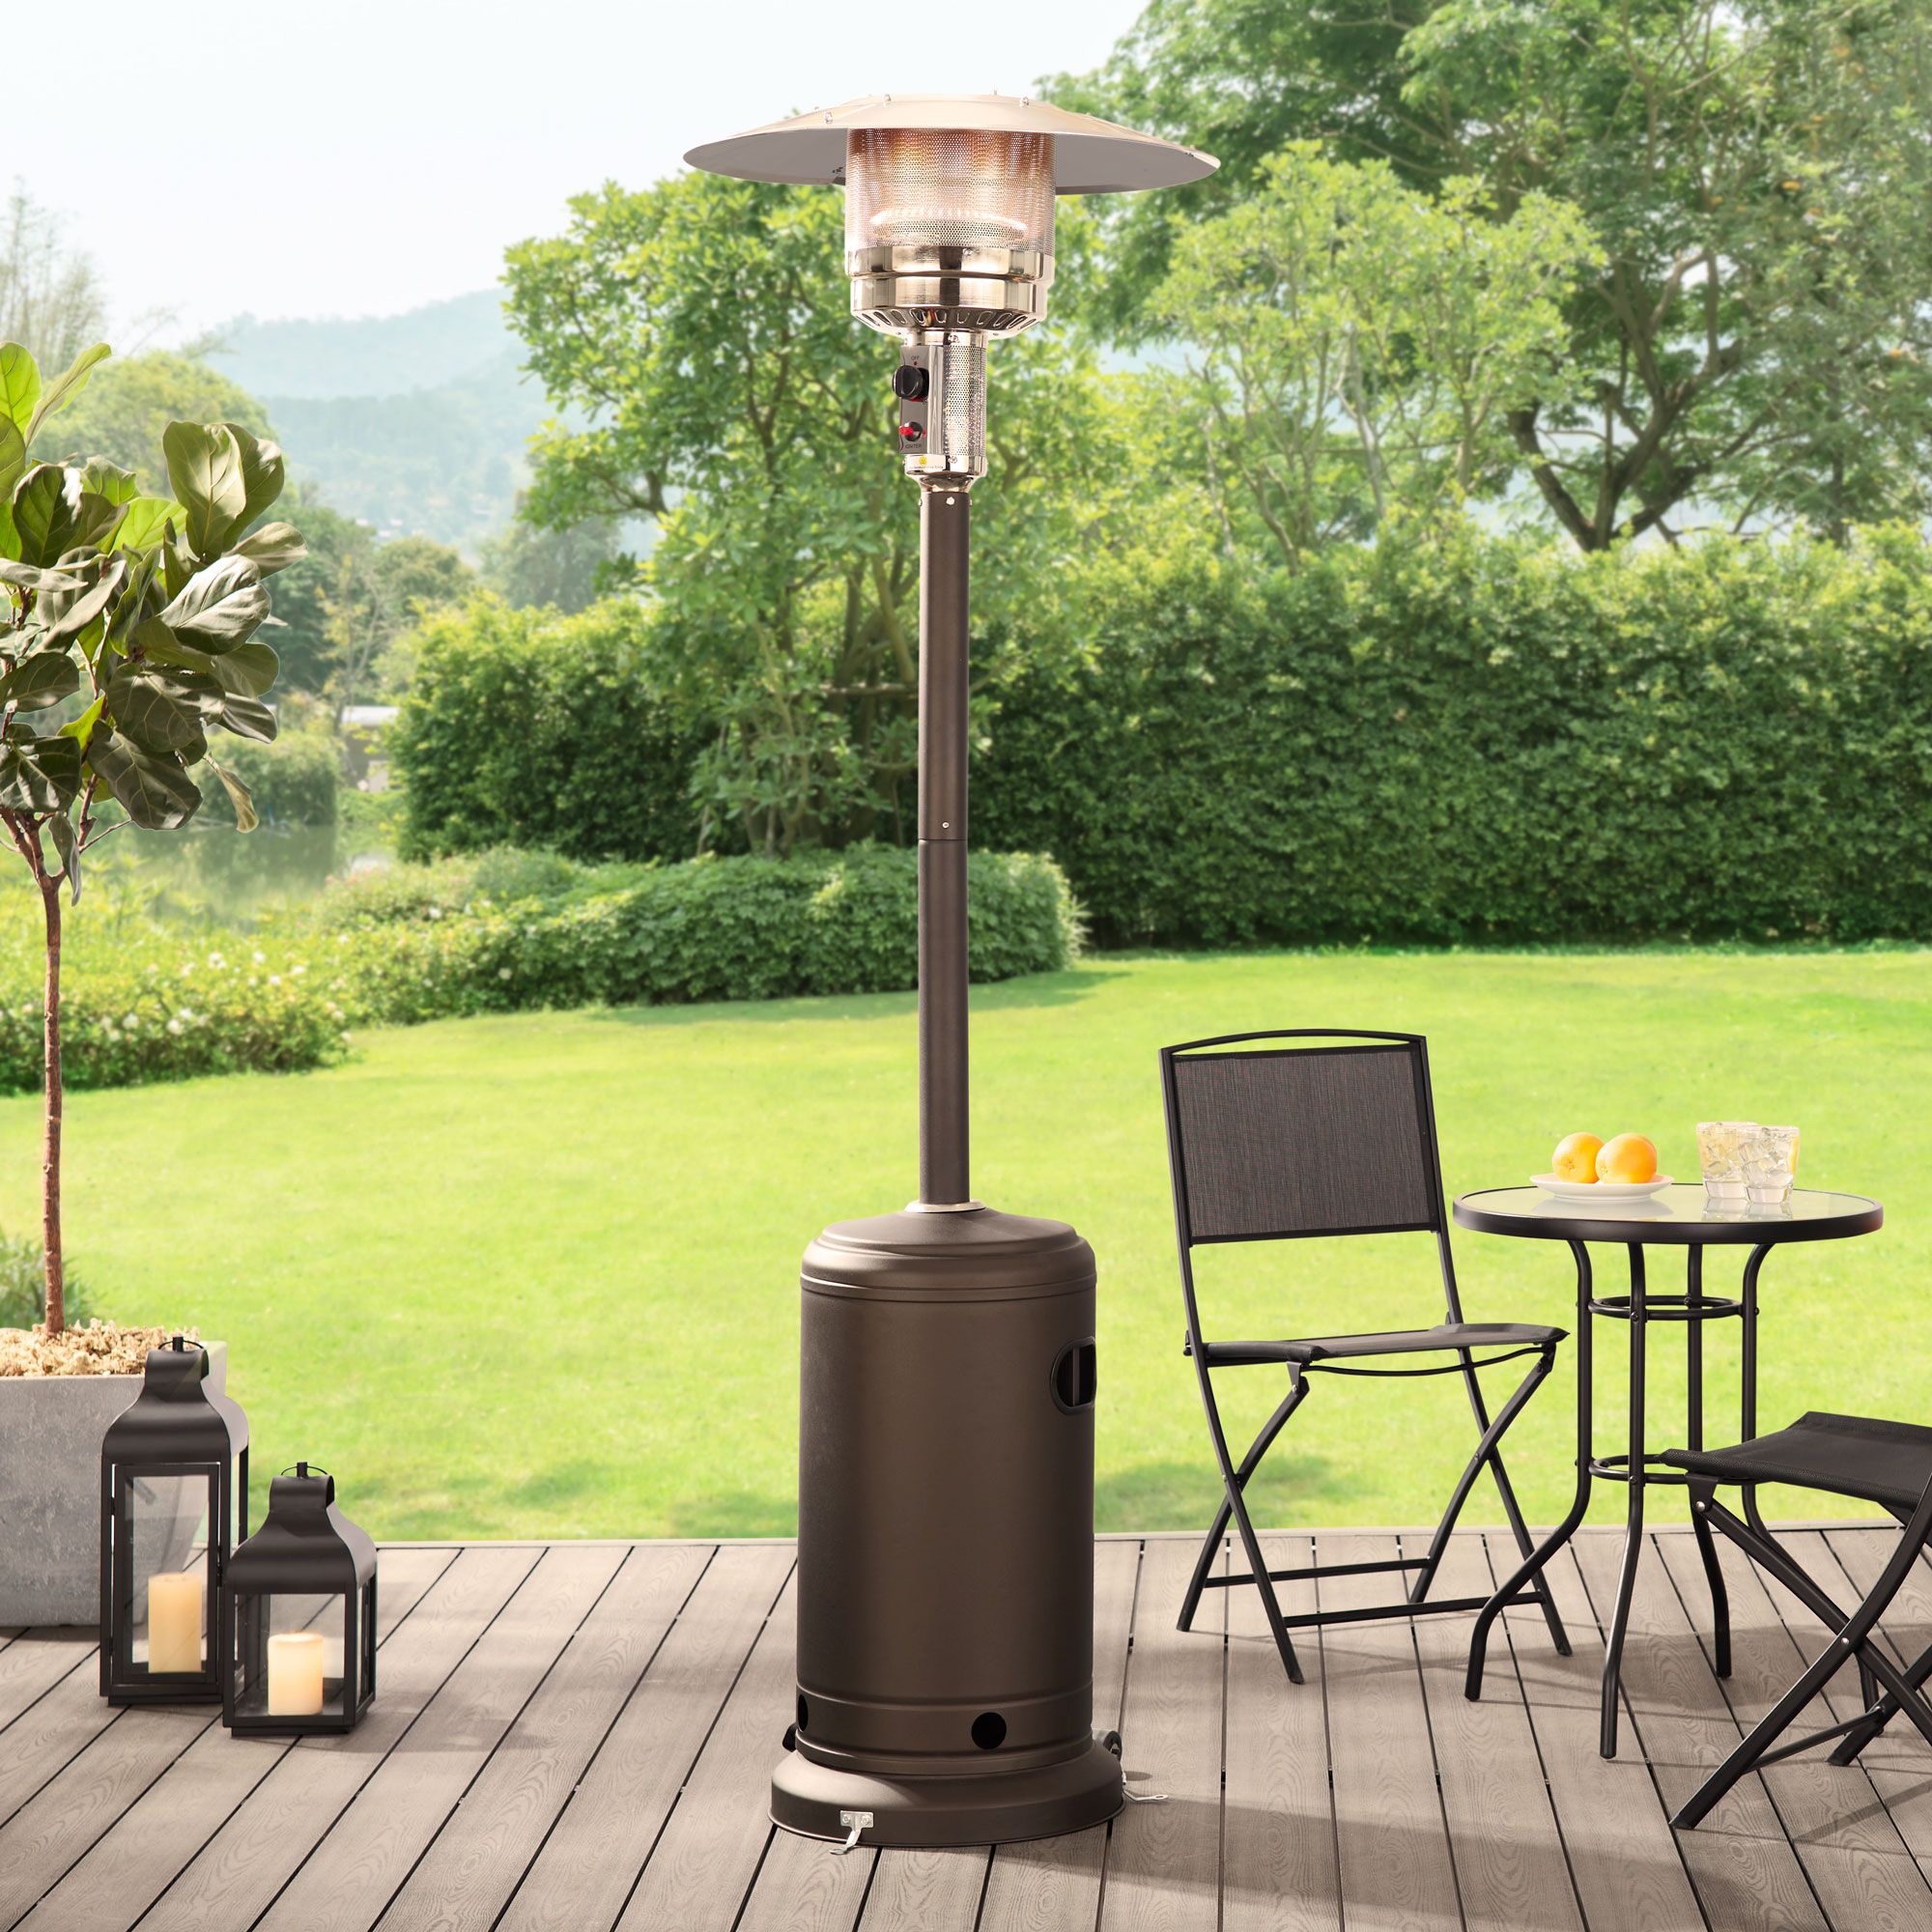 Tip-Over and Overheat Protection for Garage Dog House Outdoor/Indoor 3 Power Level Adjustable Patio Standing Heater Height Scalable 71-83 Standing Outdoor Heater 